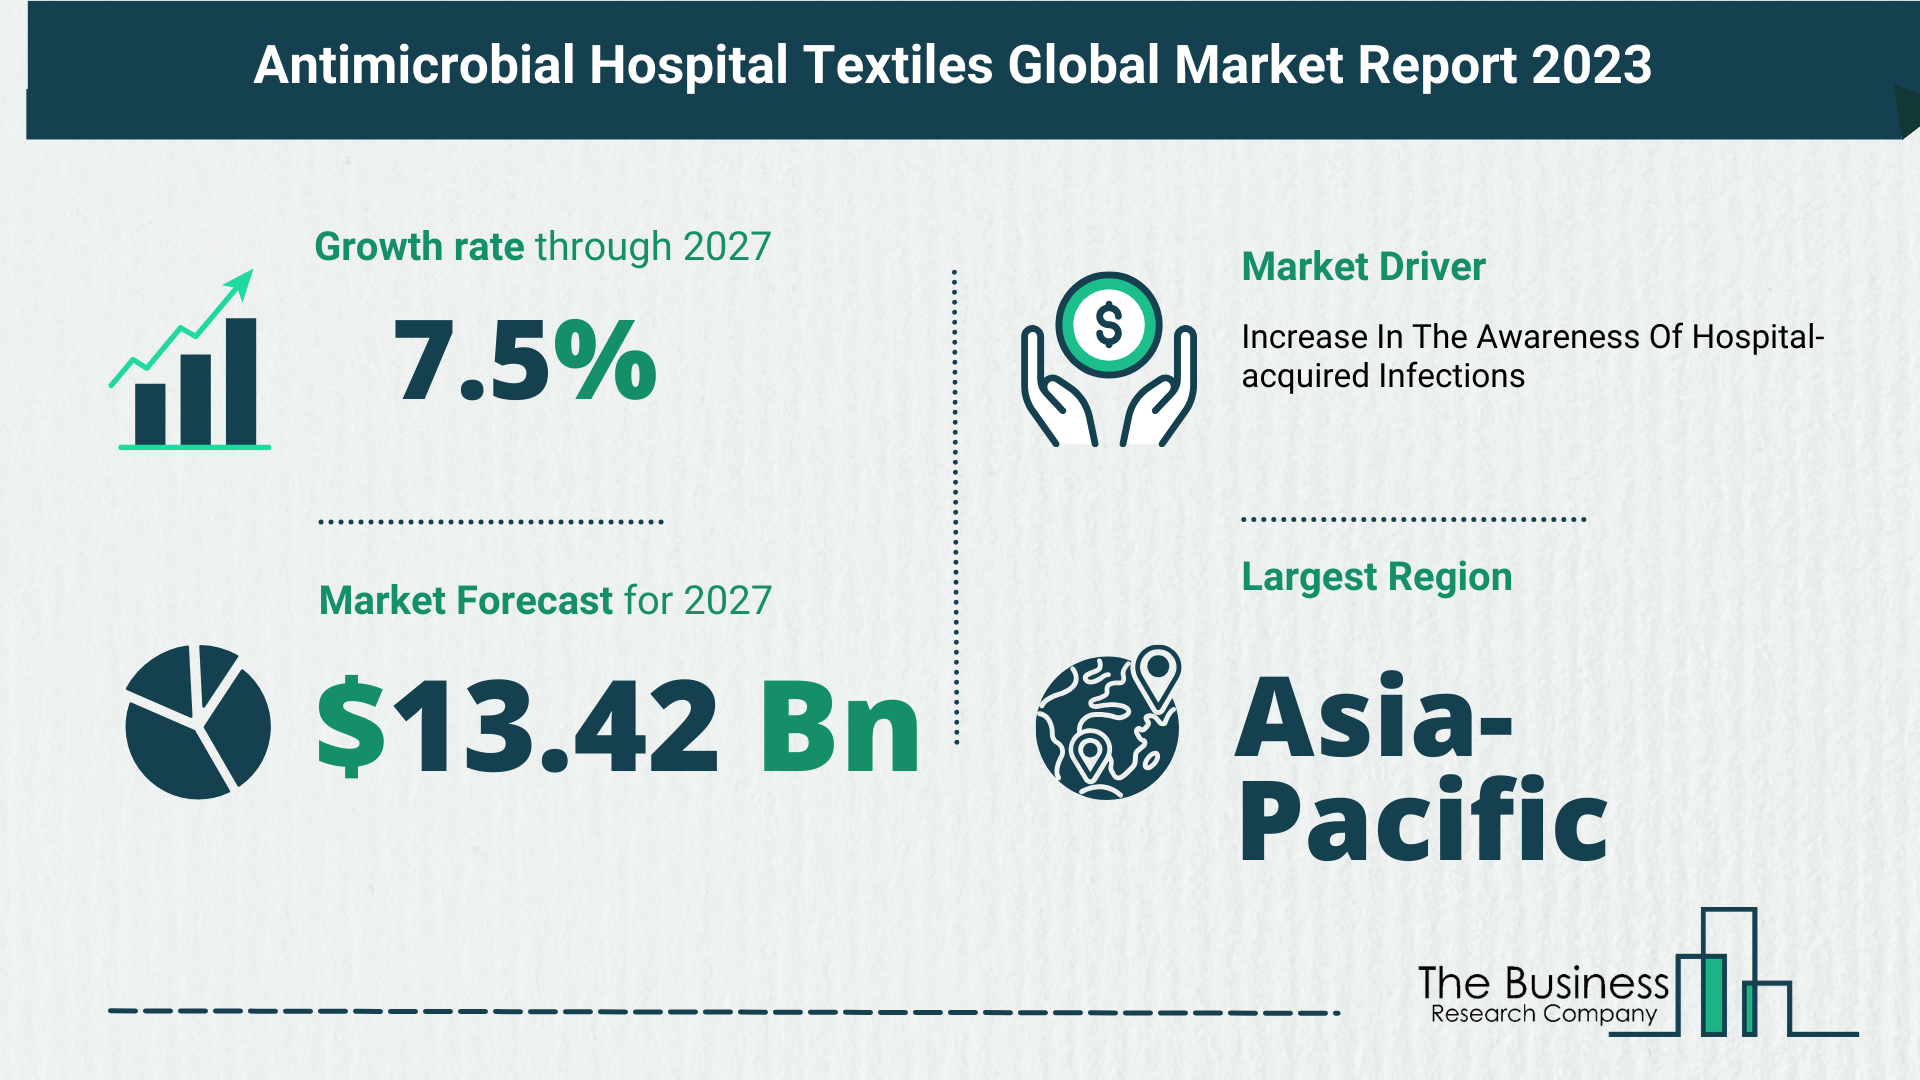 Antimicrobial Hospital Textiles Market Report 2023: Market Size, Drivers, And Trends